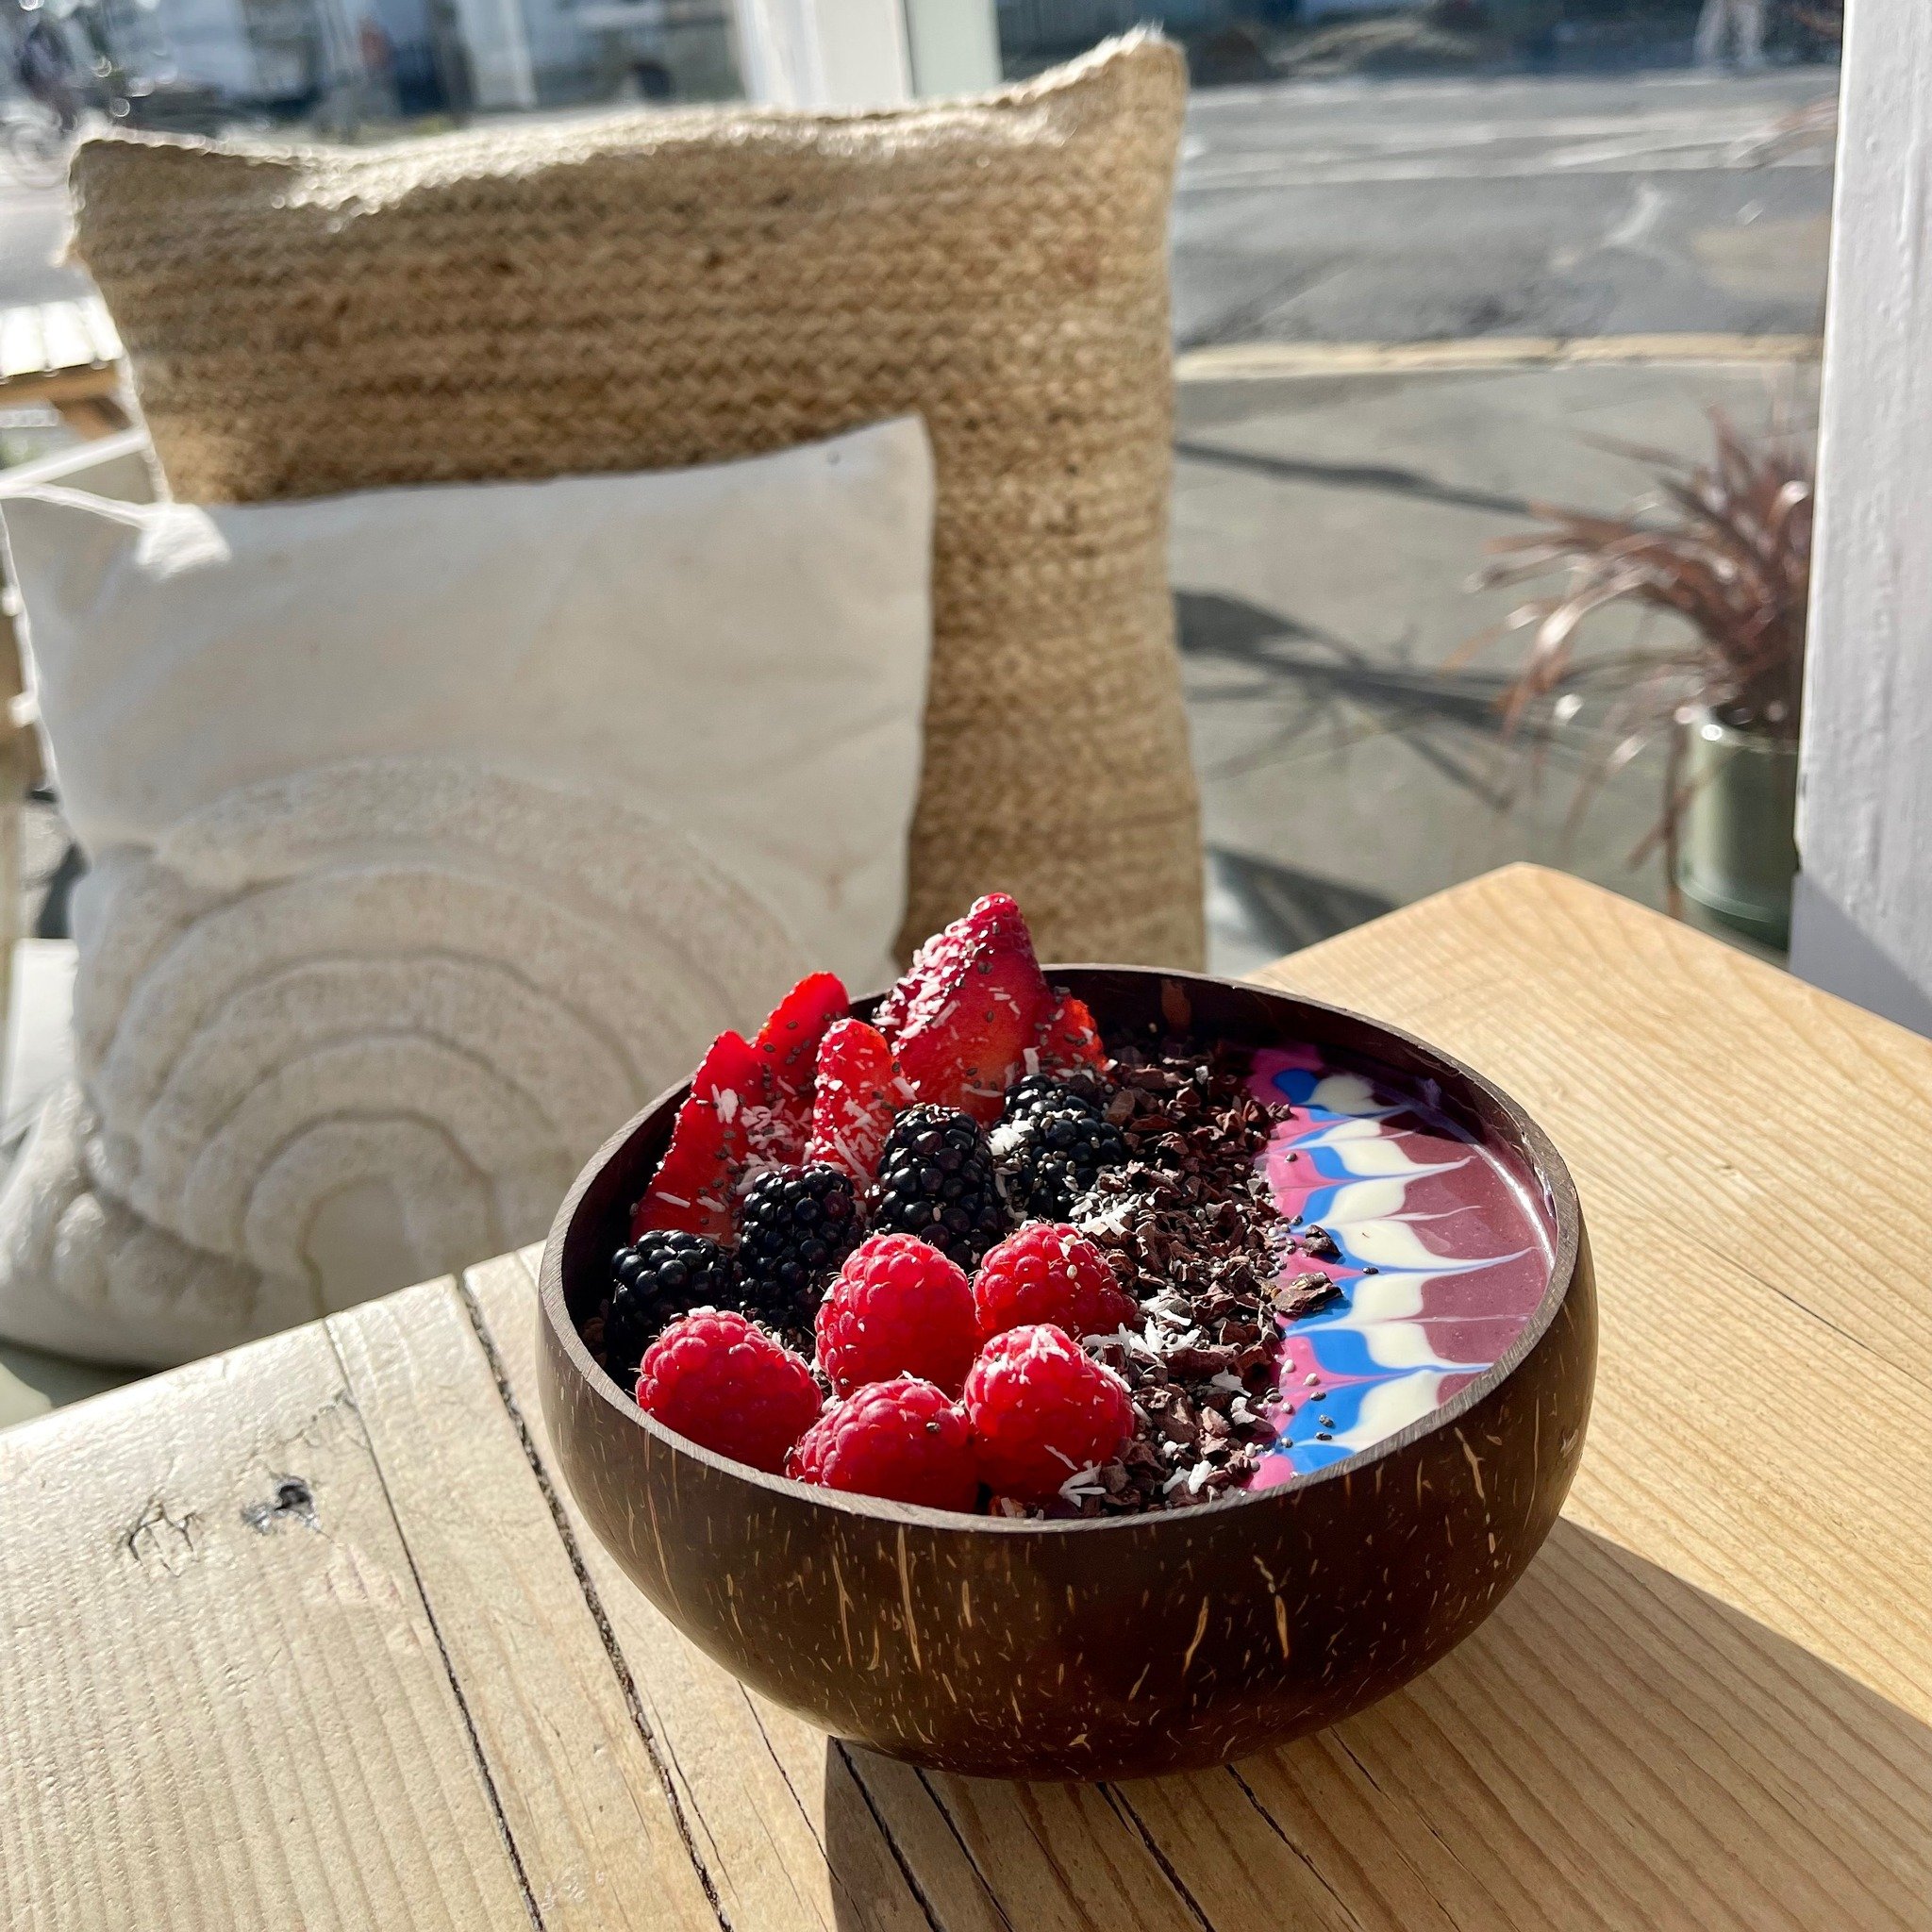 🌿🍇 Indulge in acai while watching the world go by at our beautiful Cheltenham cafe! 🌎✨